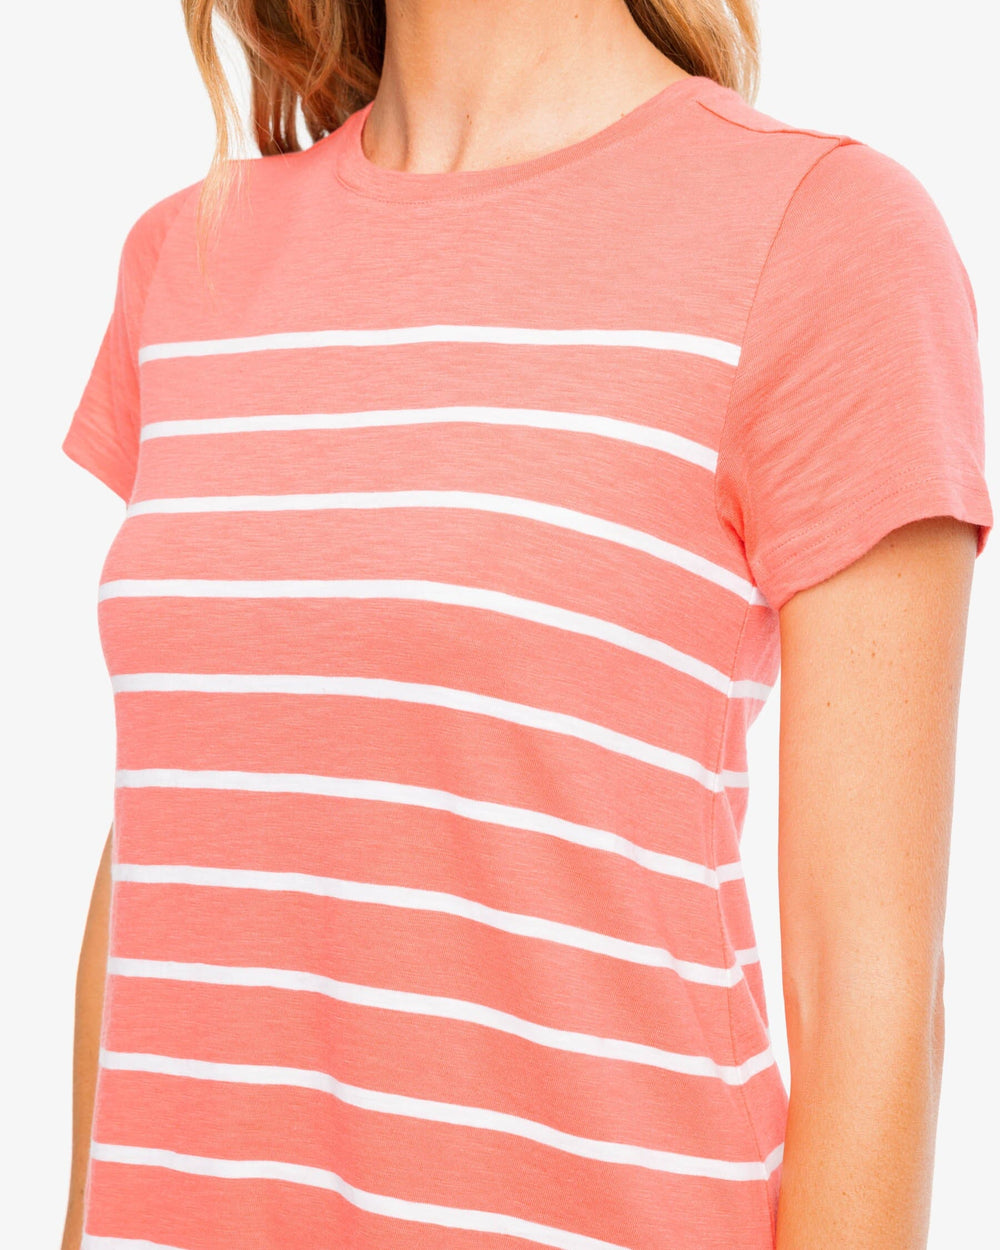 The detail view of the Southern Tide Delilah Sun Farer T-shirt Shirt Dress by Southern Tide - Sunkist Coral